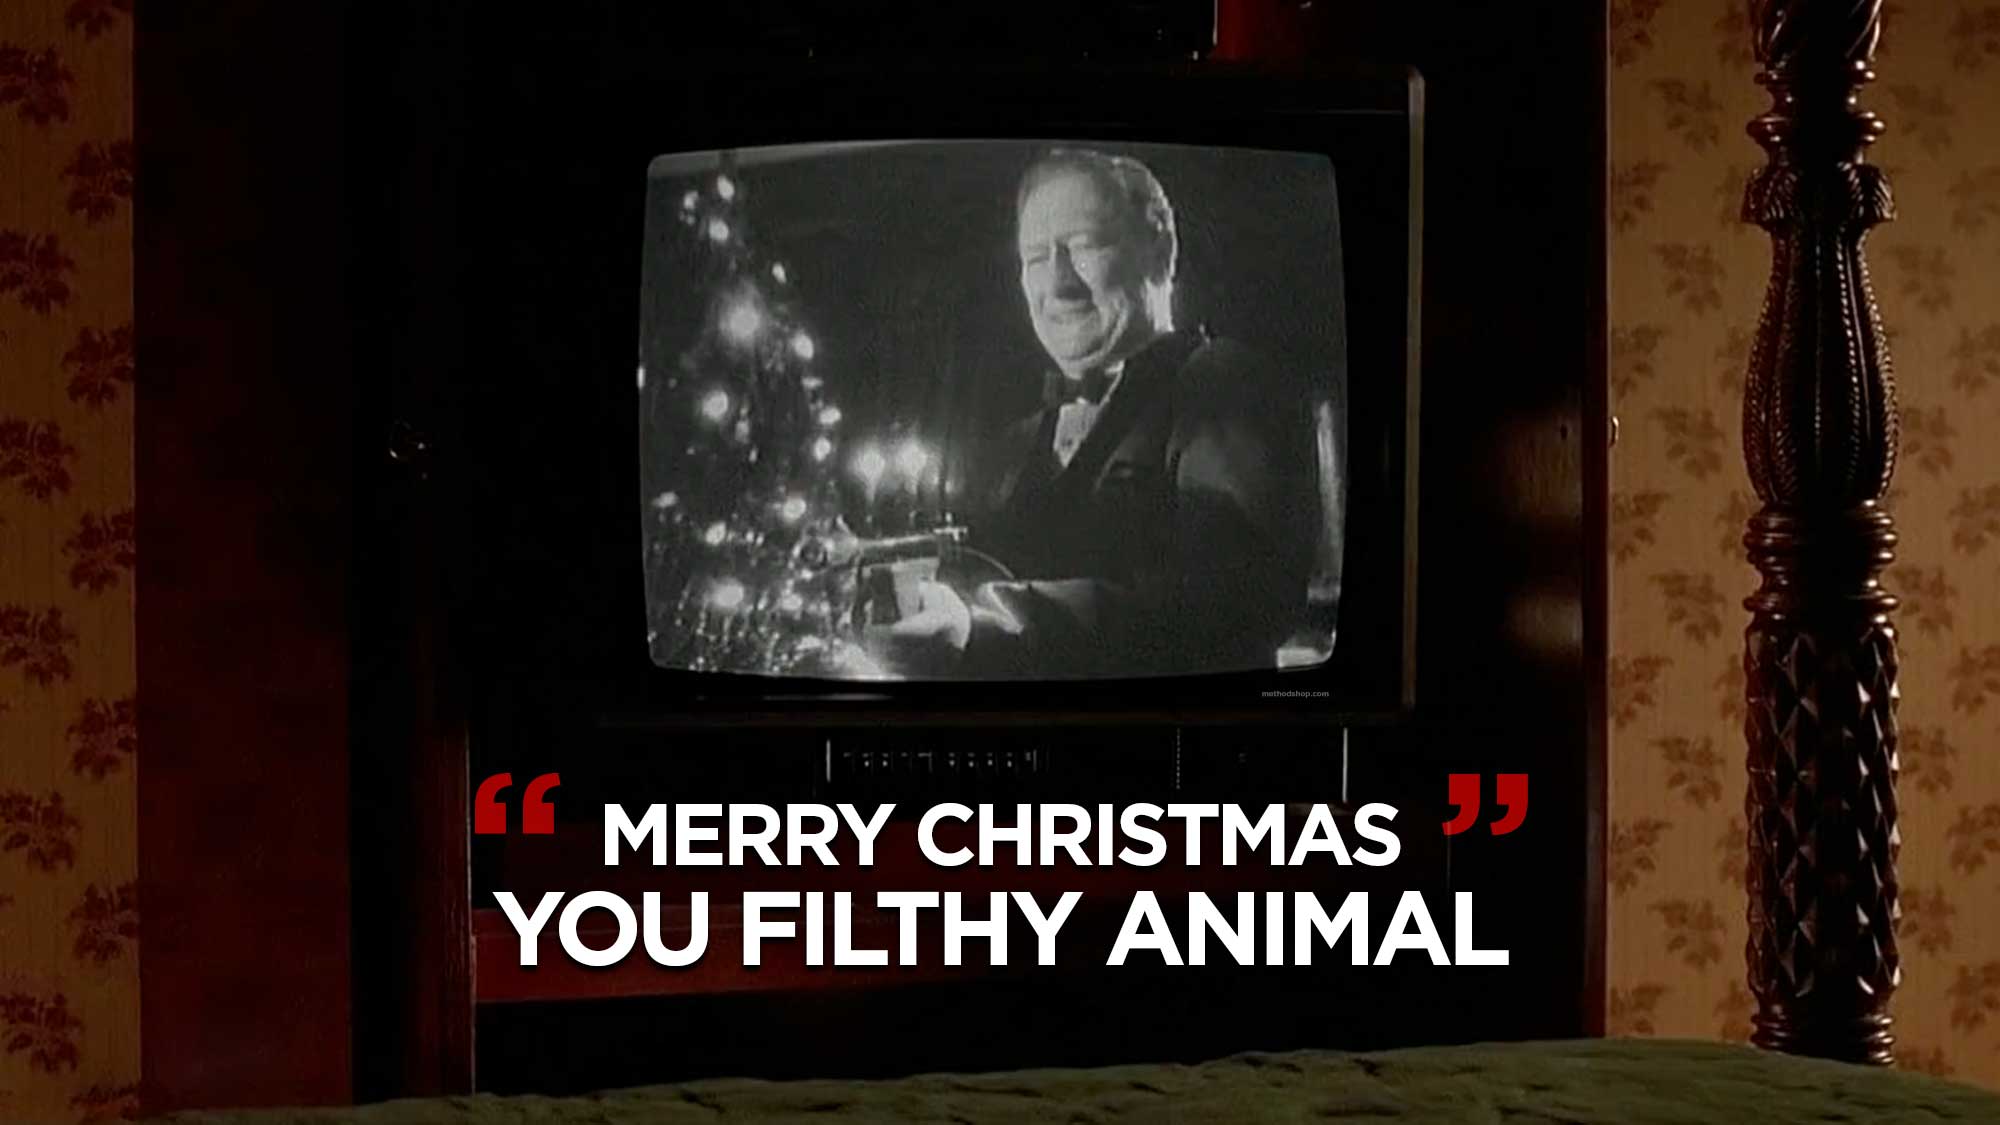 Where Did The Phrase "Merry Christmas You Filthy Animal" Come From?